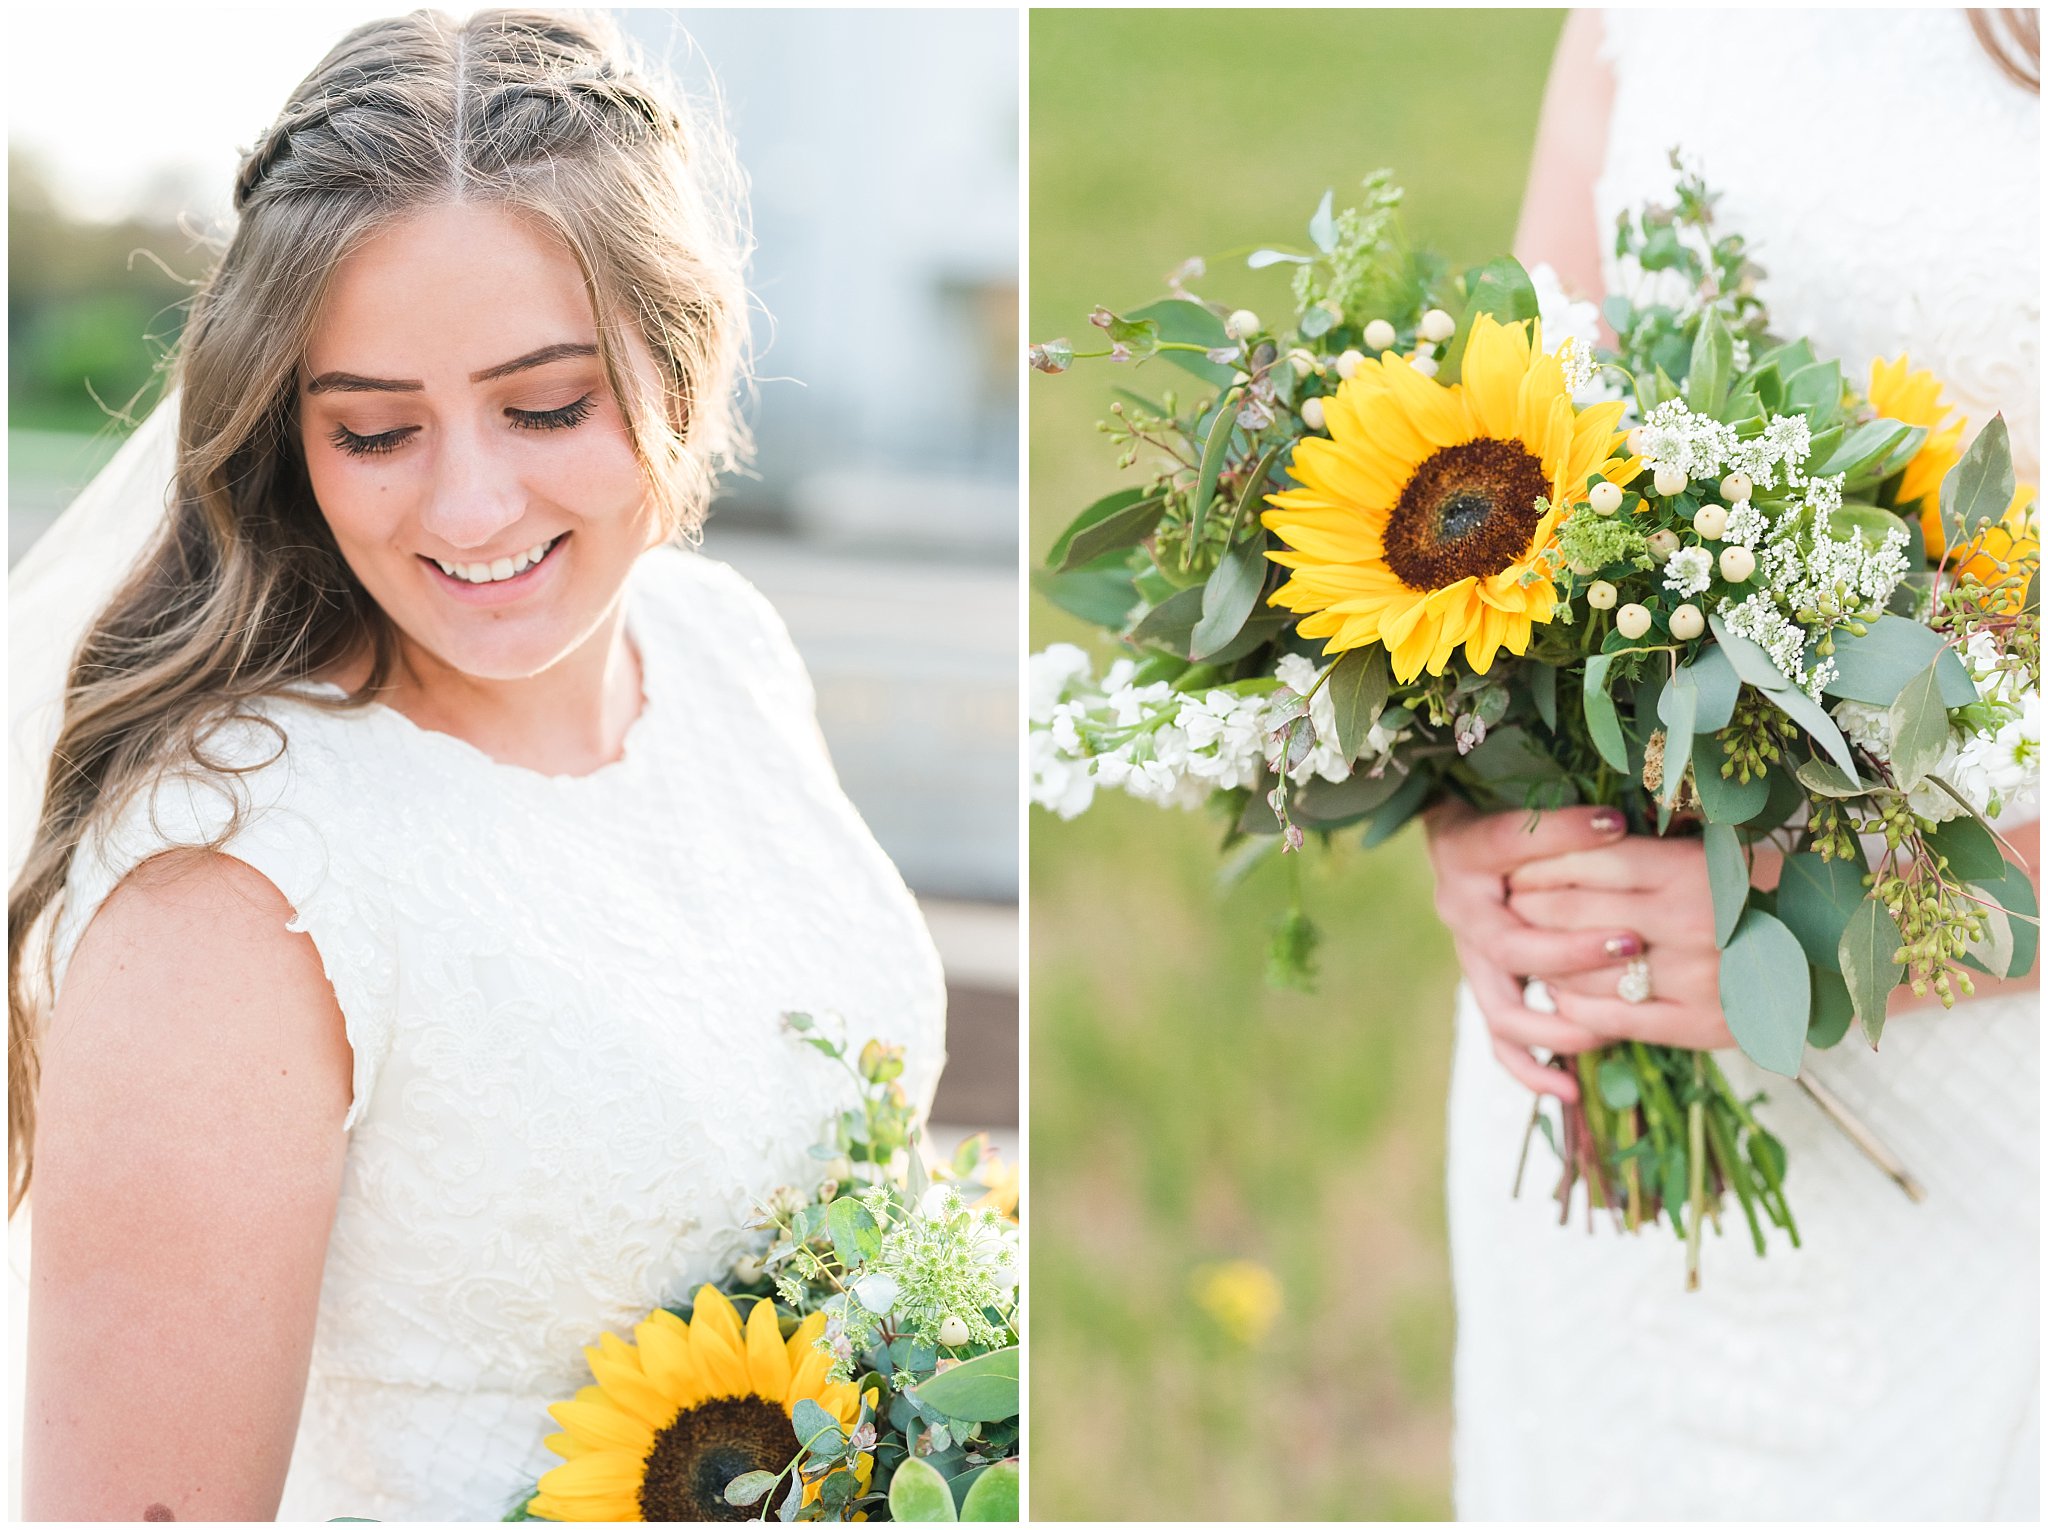 Bride with sunflower and succulent bouquet at the Brigham City Temple | Brigham City Temple and Mantua Mountain Formal Session | Jessie and Dallin Photography